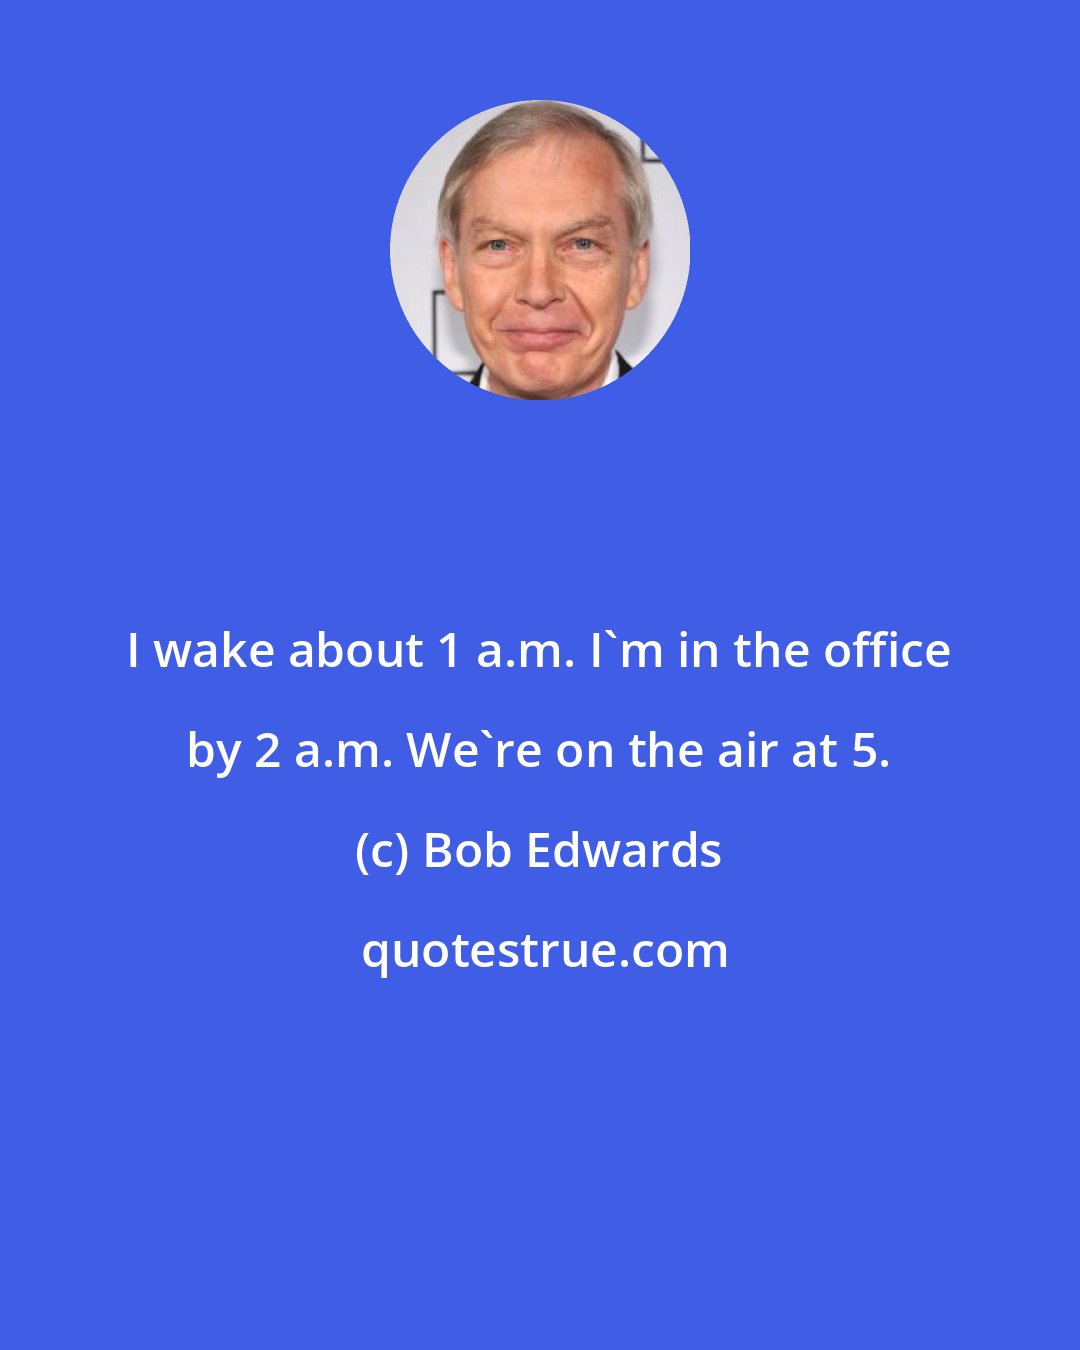 Bob Edwards: I wake about 1 a.m. I'm in the office by 2 a.m. We're on the air at 5.